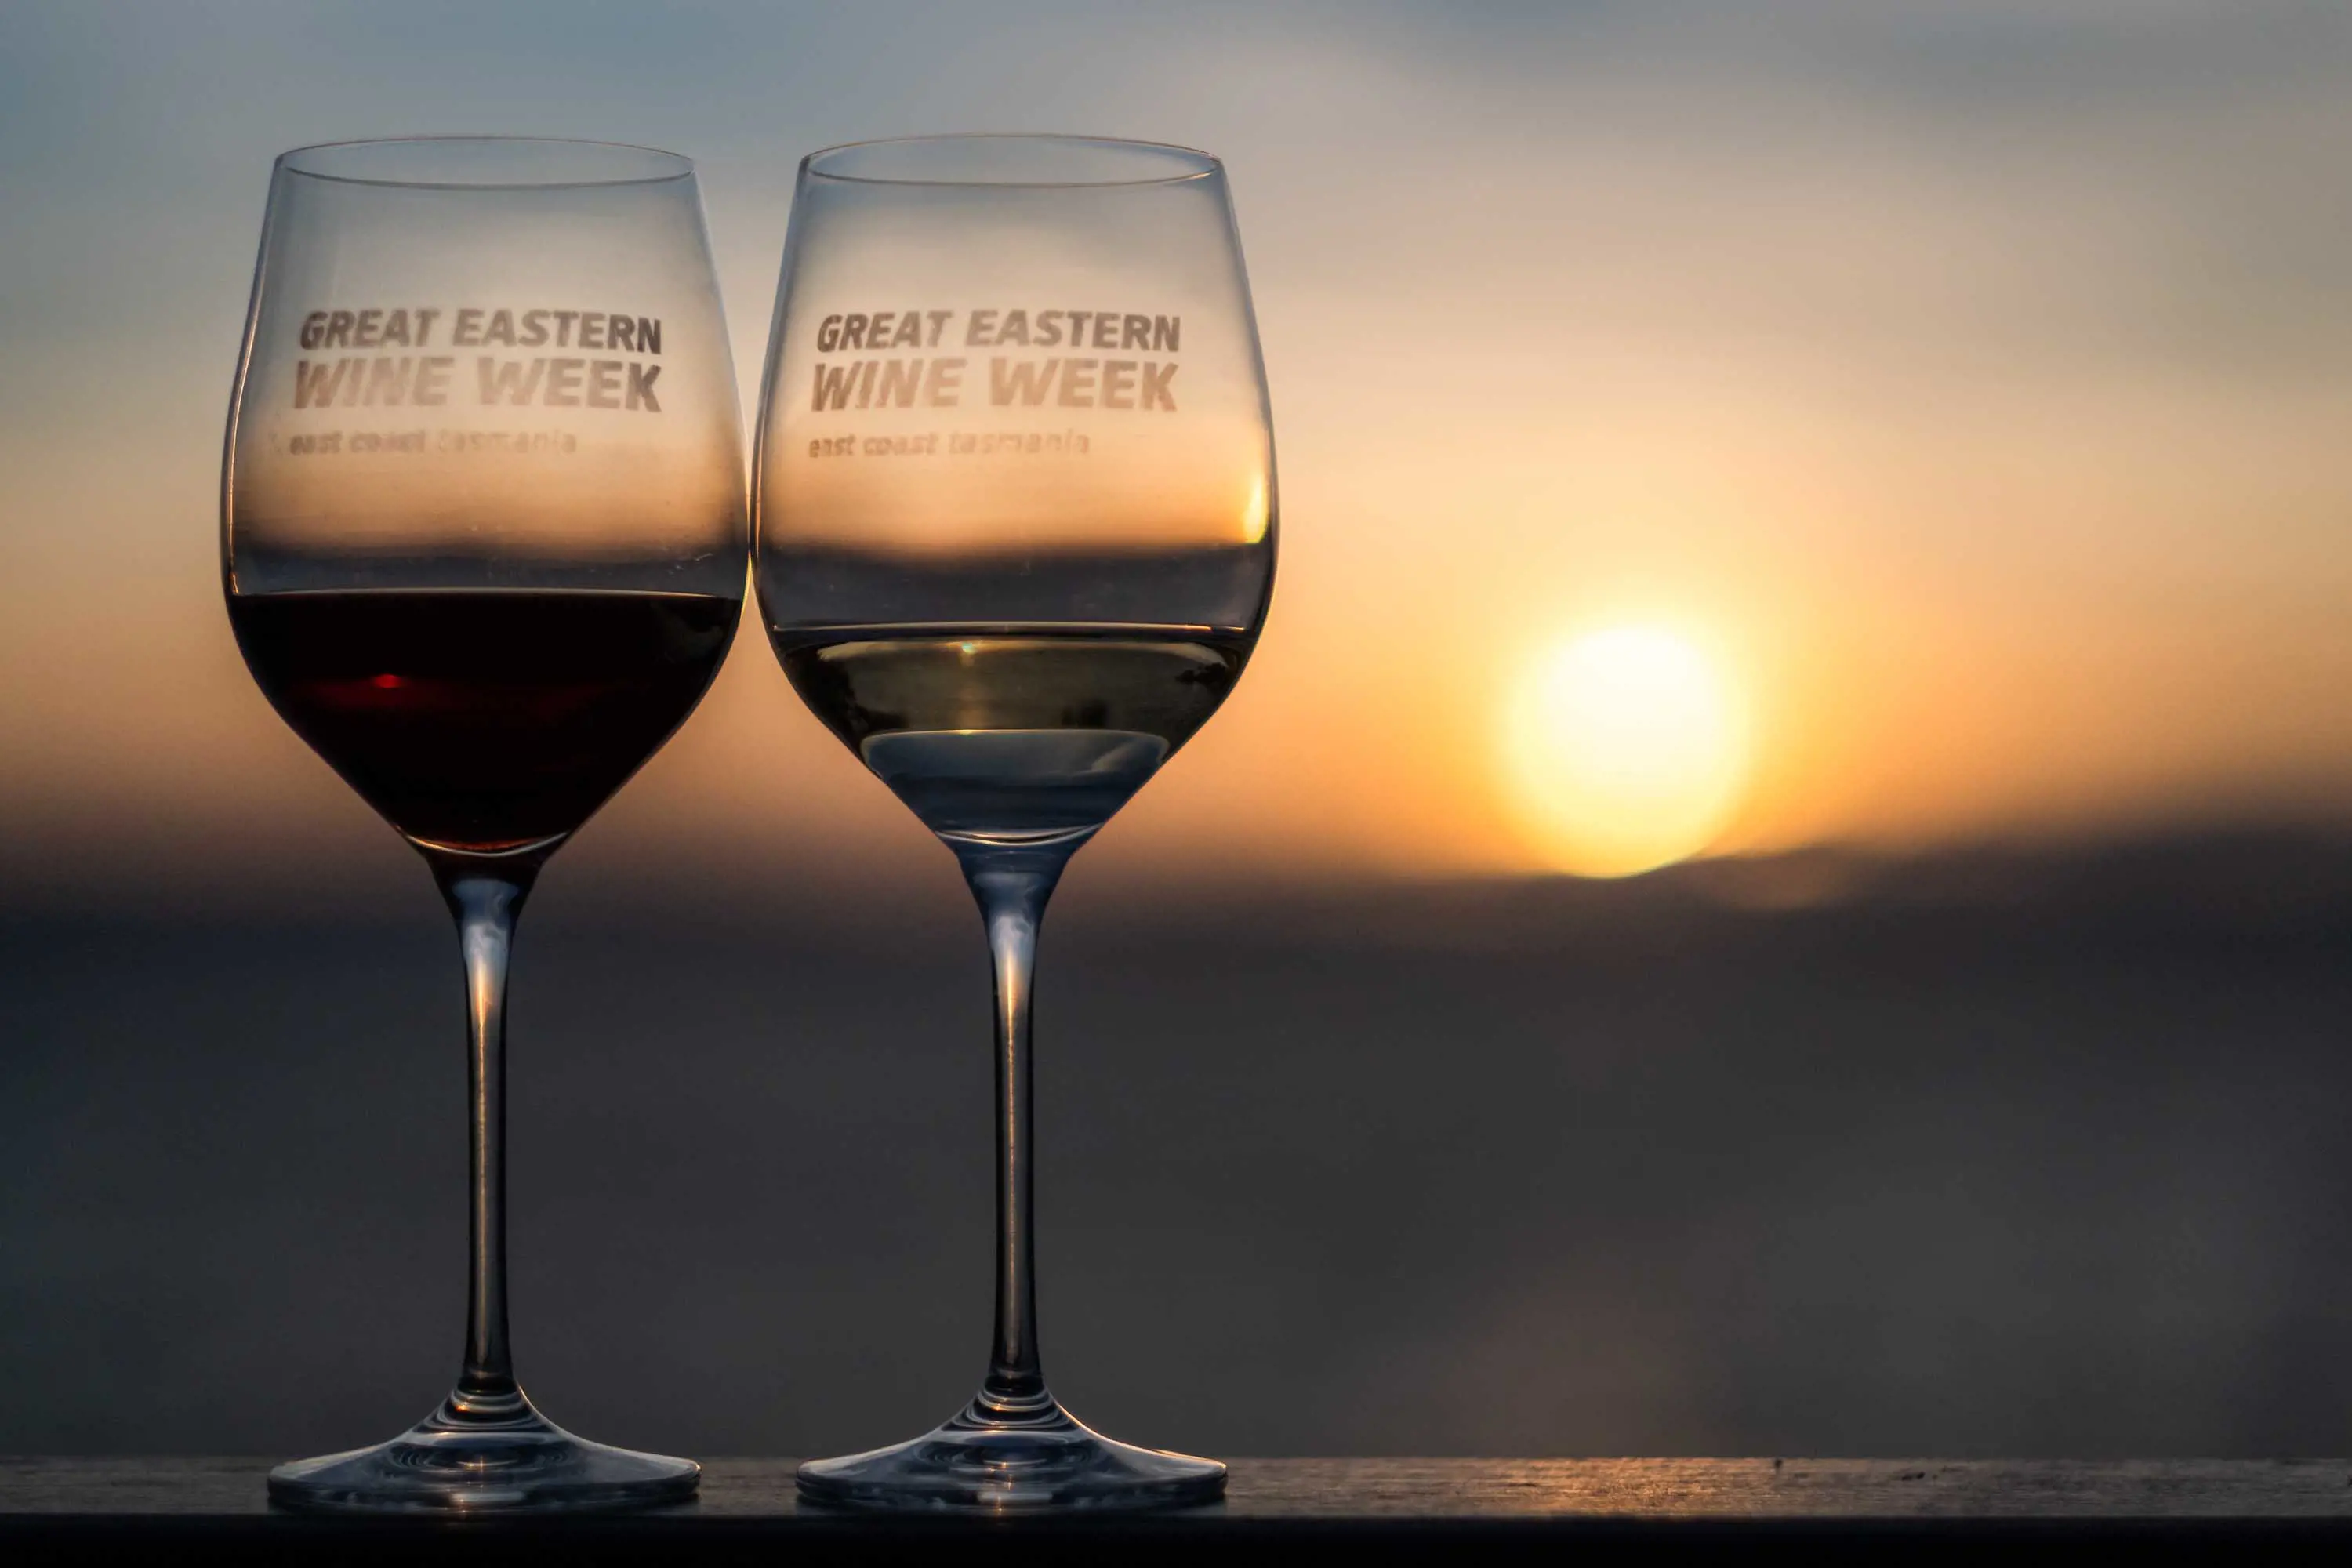 Two wine glasses filled with white wine sit on a bench with the sun setting in the distance.